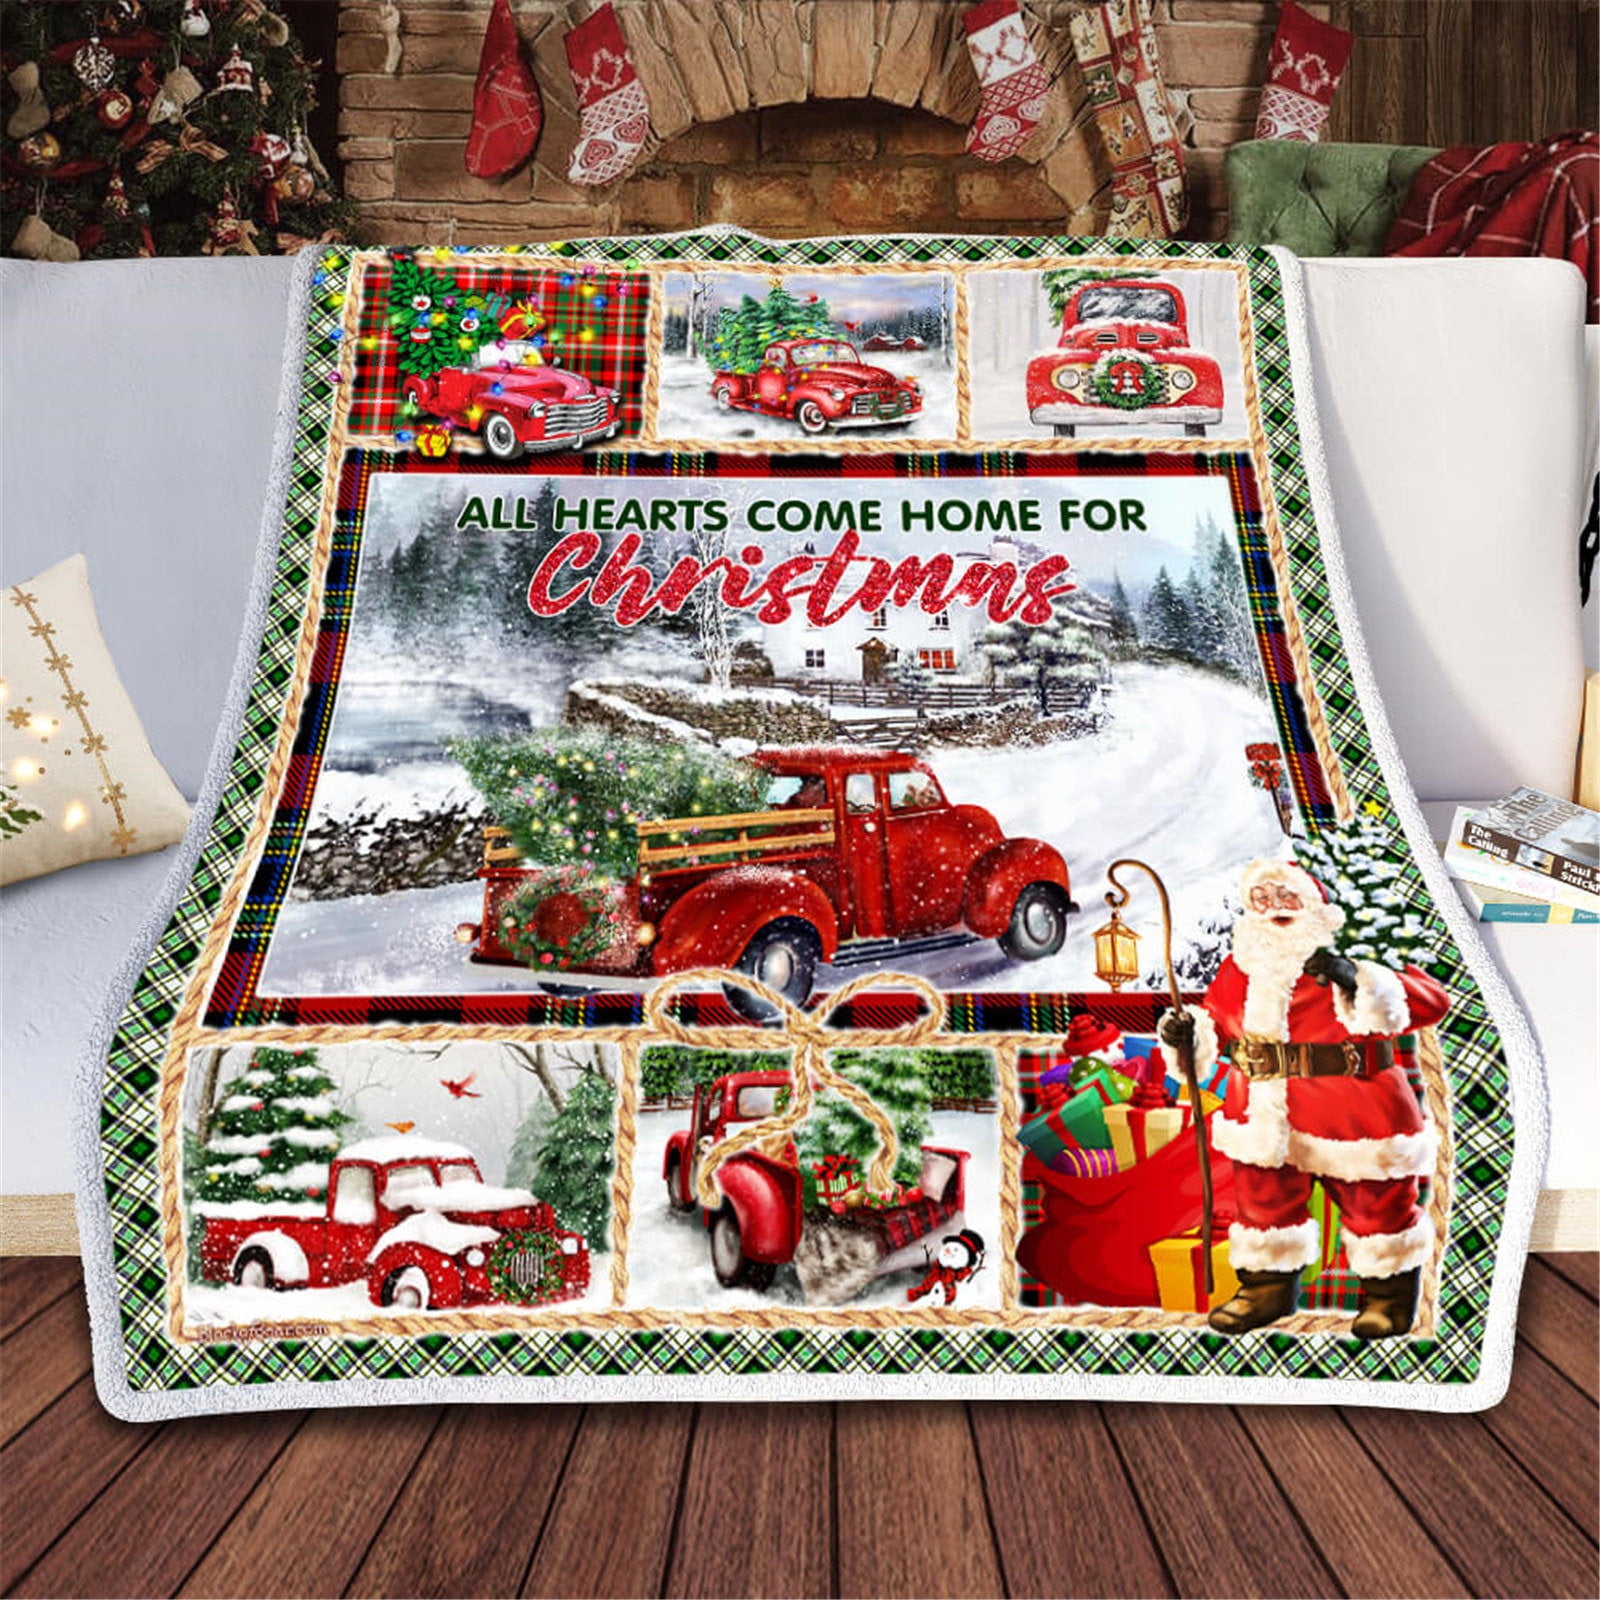 Christmas Throw Blanket Cardinals Red Green Pot Warm Blankets Super Soft Lightweight for Couch Bed Chair Office Sofa Travelling Camping 50x60 in Home Xmas Decor 